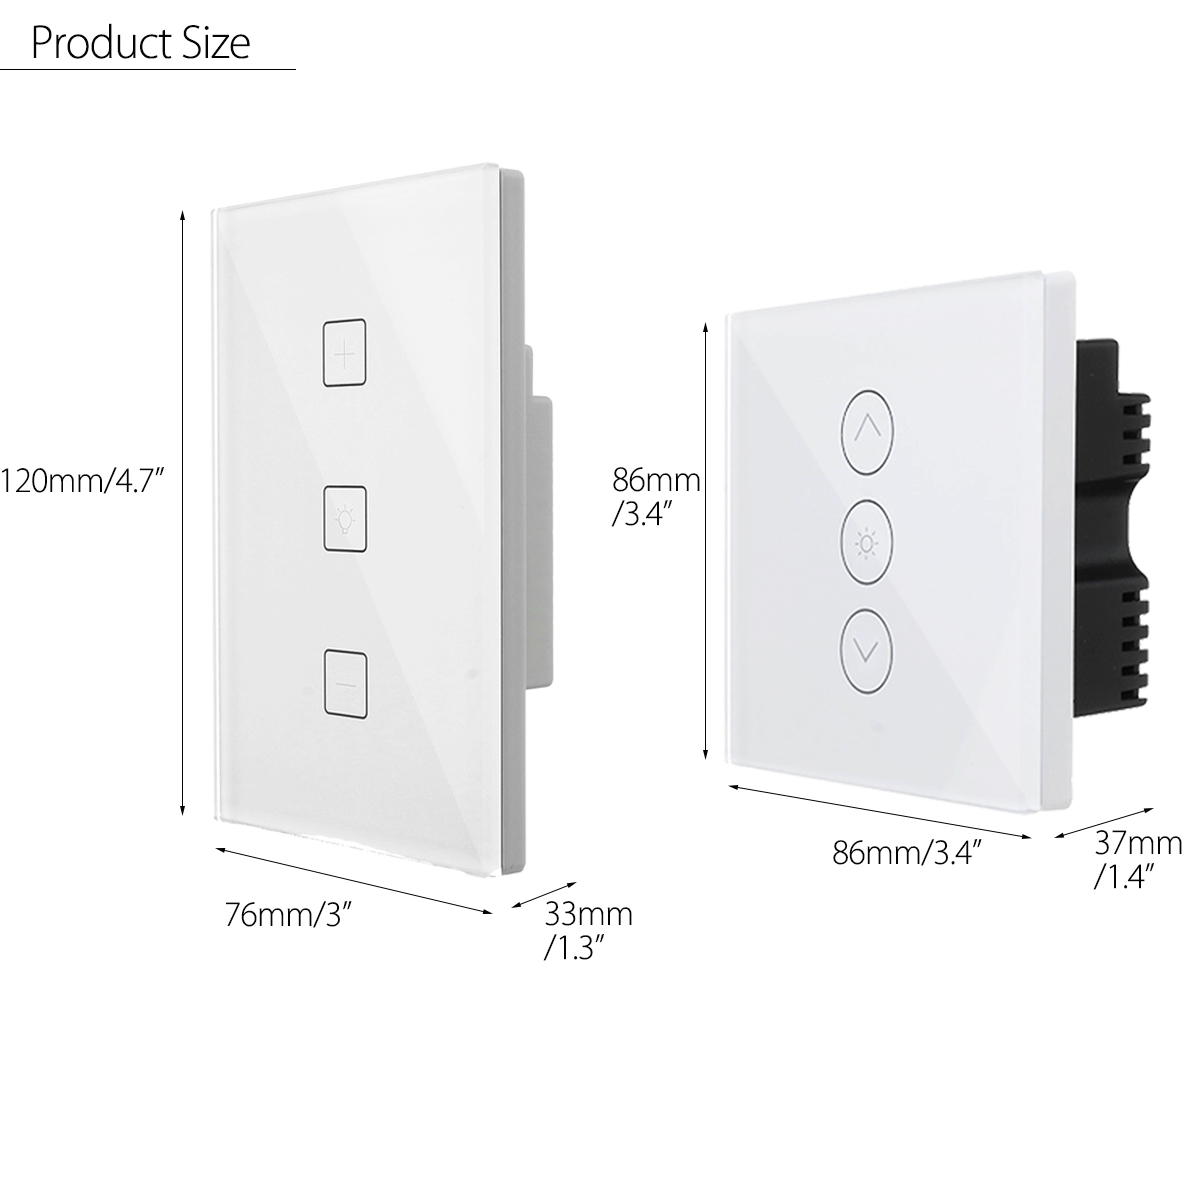 WIFI-Smart-Dimmer-Light-Wall-Switch-Touch-Remote-Control-Work-with-AlexaGoogle-Home-1302550-8